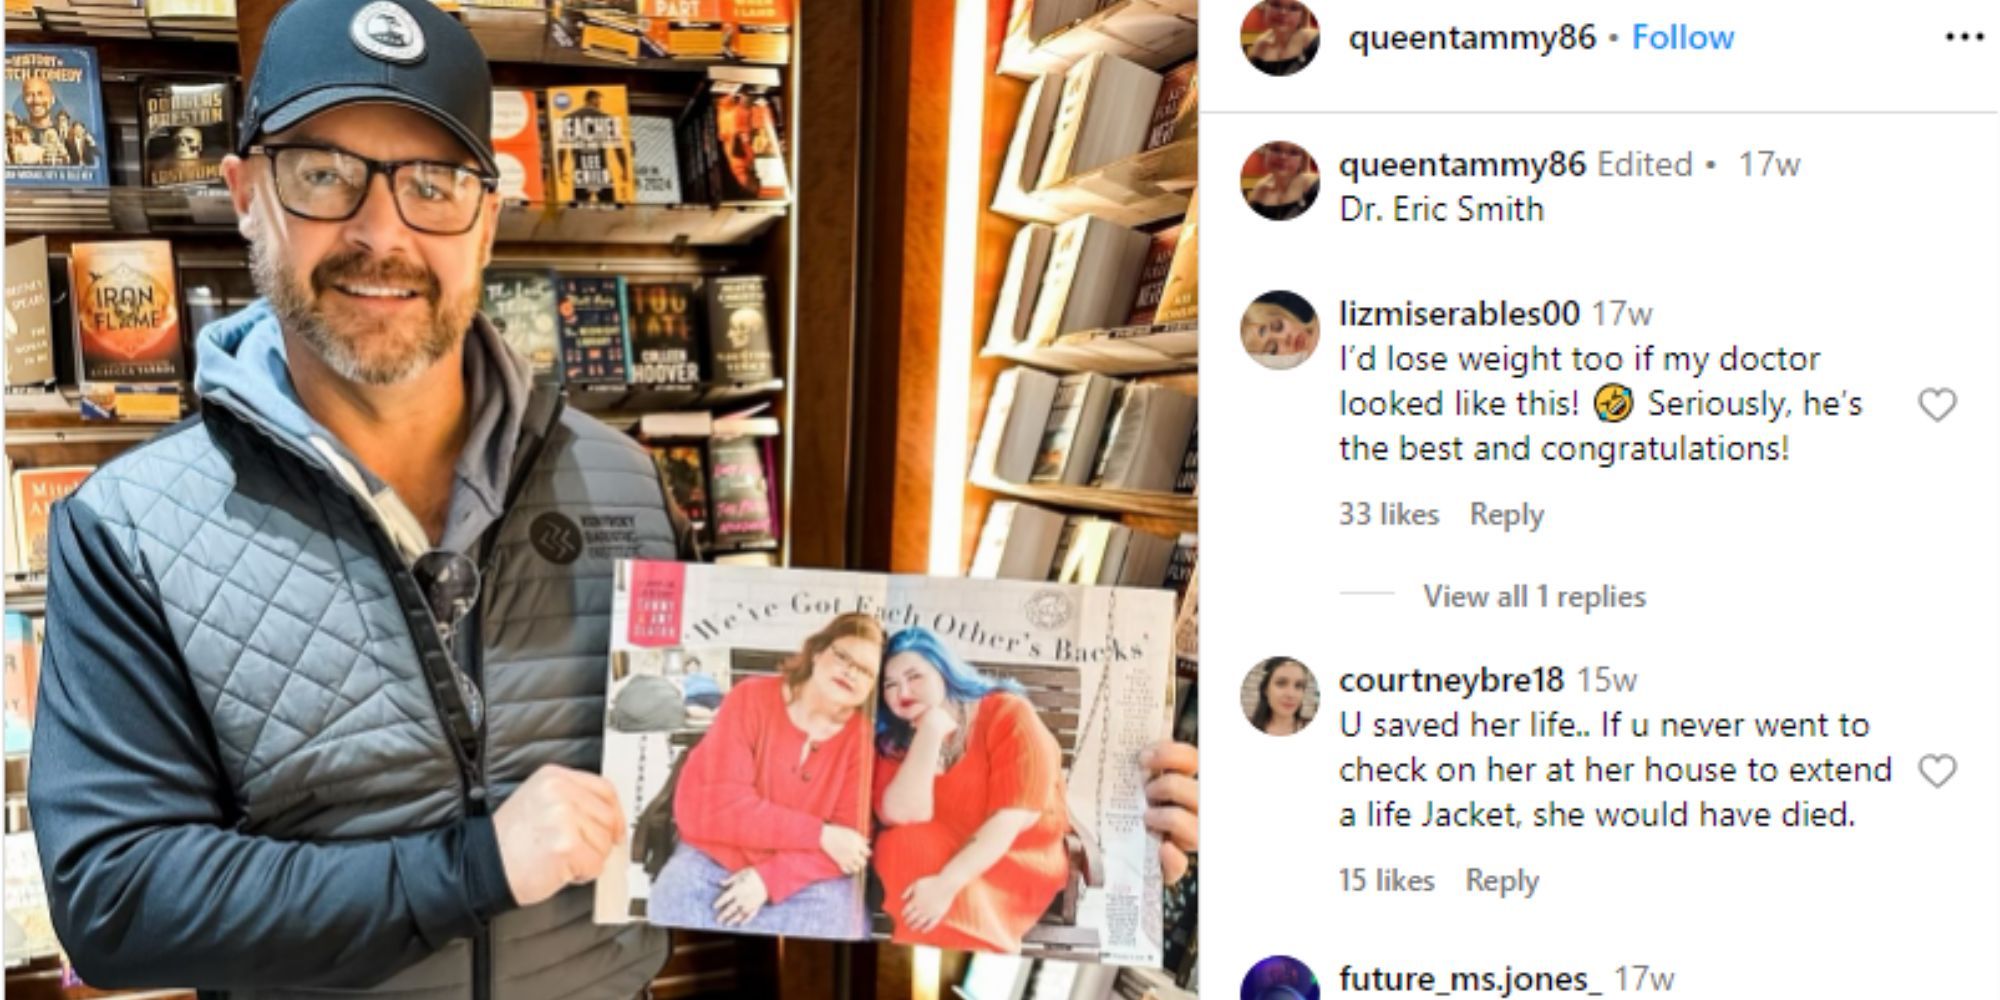 1000-lb sisters dr eric smith at a bookstore, holding up a magazine photo of Tammy & Amy slaton